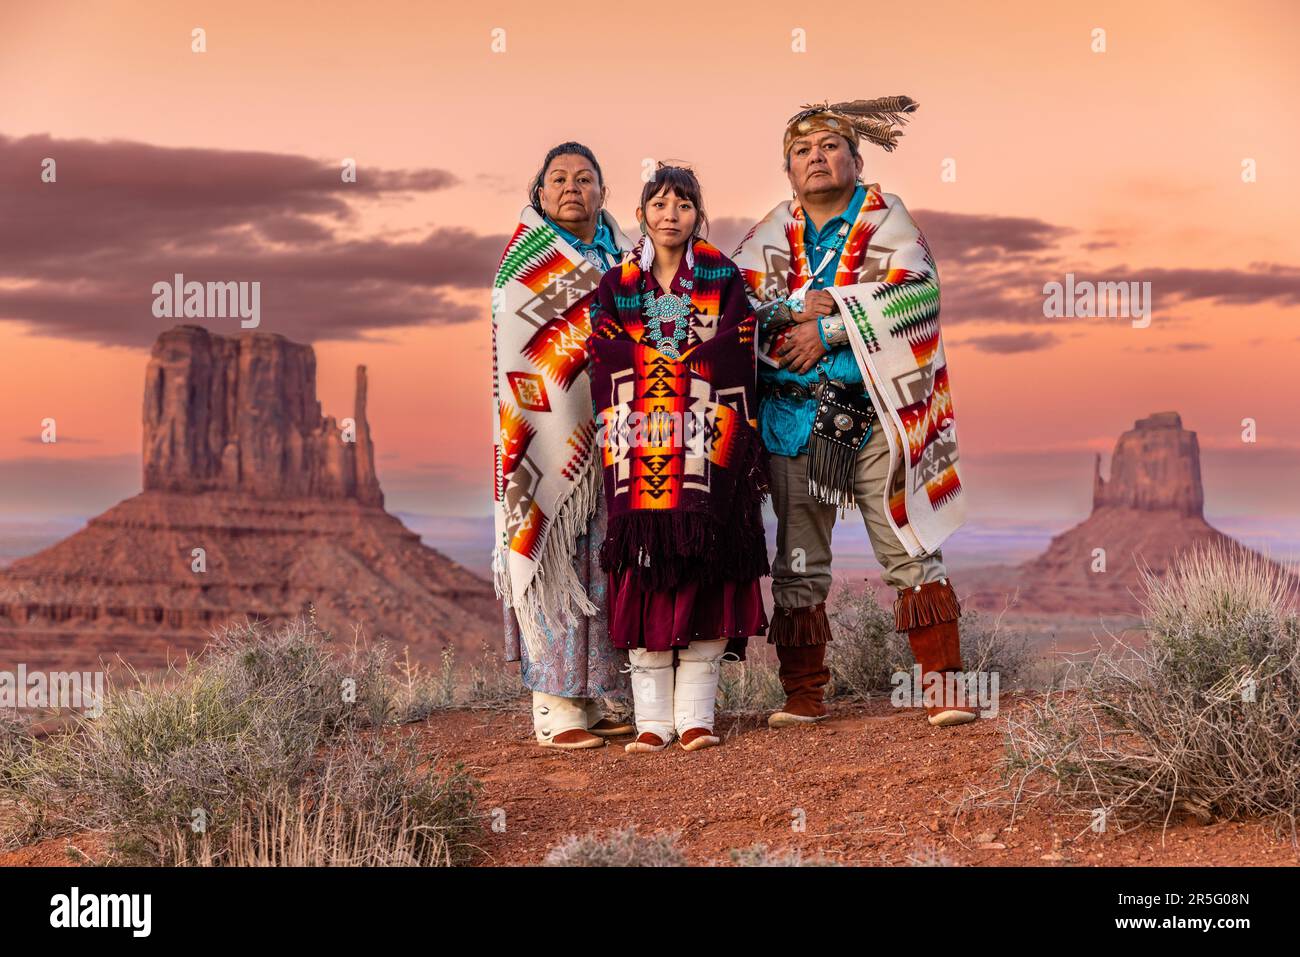 American Indian Navajo family posing during sunset at Monument Valley sunset, Arizona, United States Stock Photo